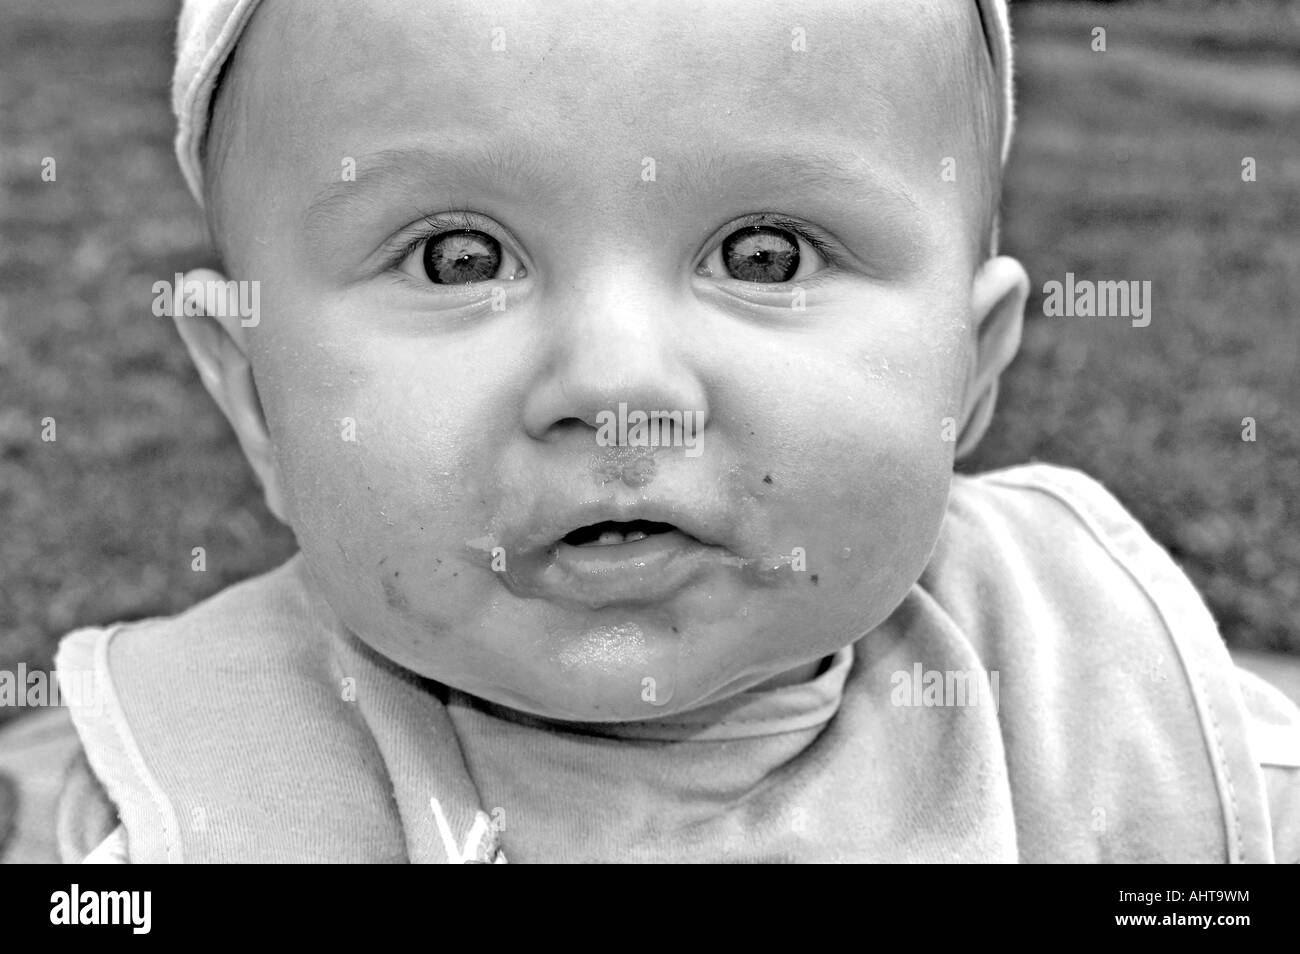 baby boy wearing a bib with food round his face in black and white Stock Photo